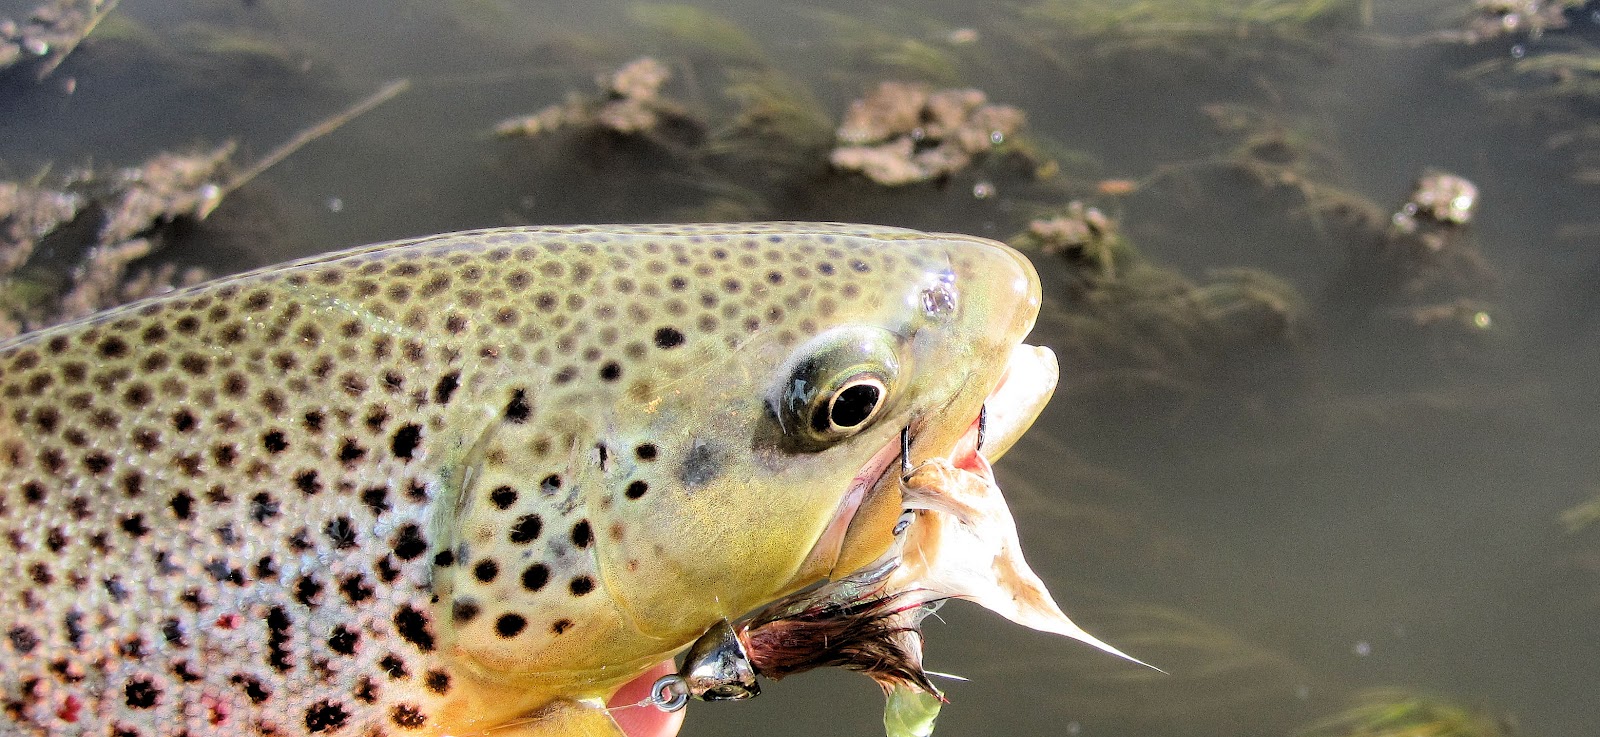 2.2+Brown+trout+with+an+articulated+streamer+in+its+mouth-Jay+Scott+Outdoors+Flyfishing.jpg